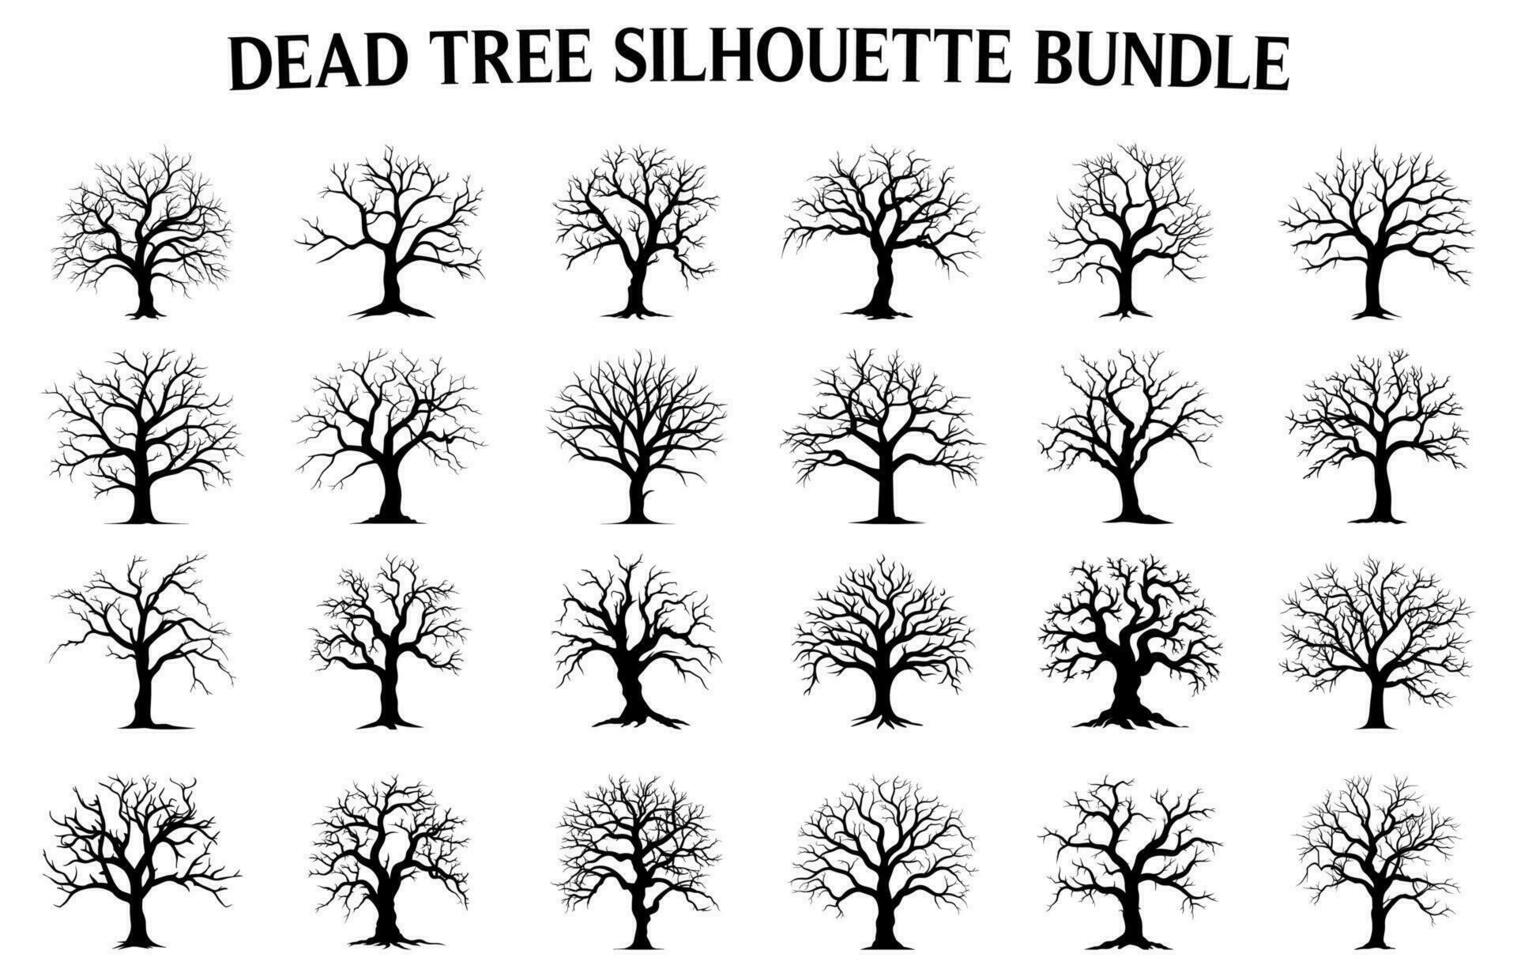 Dead Tree Vector Silhouette Collection, Scary Tree Silhouette vector bundle, Halloween Spooky Trees vector illustration, Forest Tree without leaves Silhouette